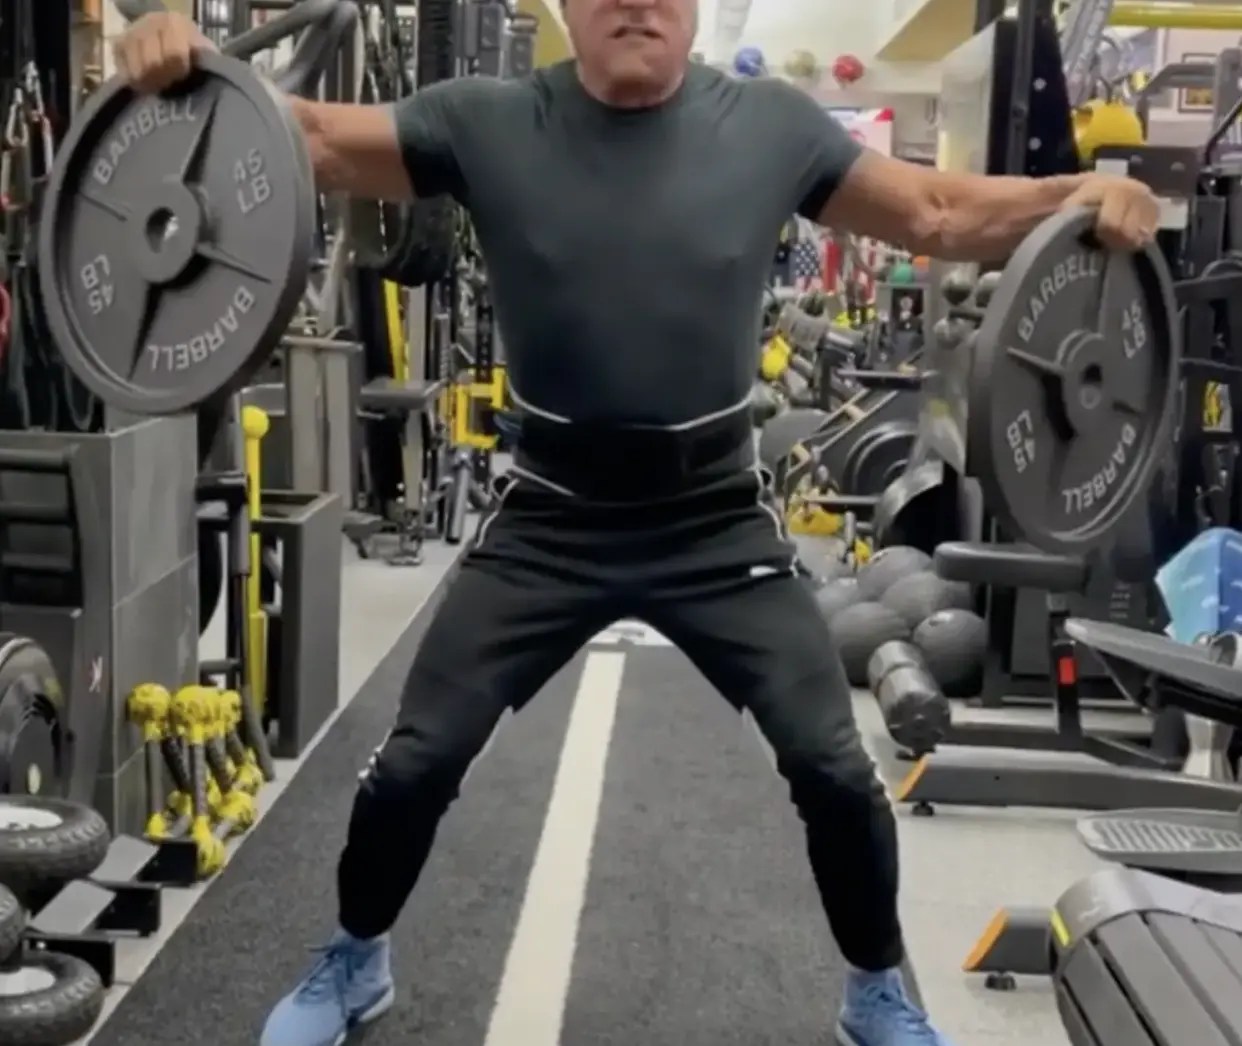 Sylvester Stallone Accused Of Using Fake Weights During His Workout